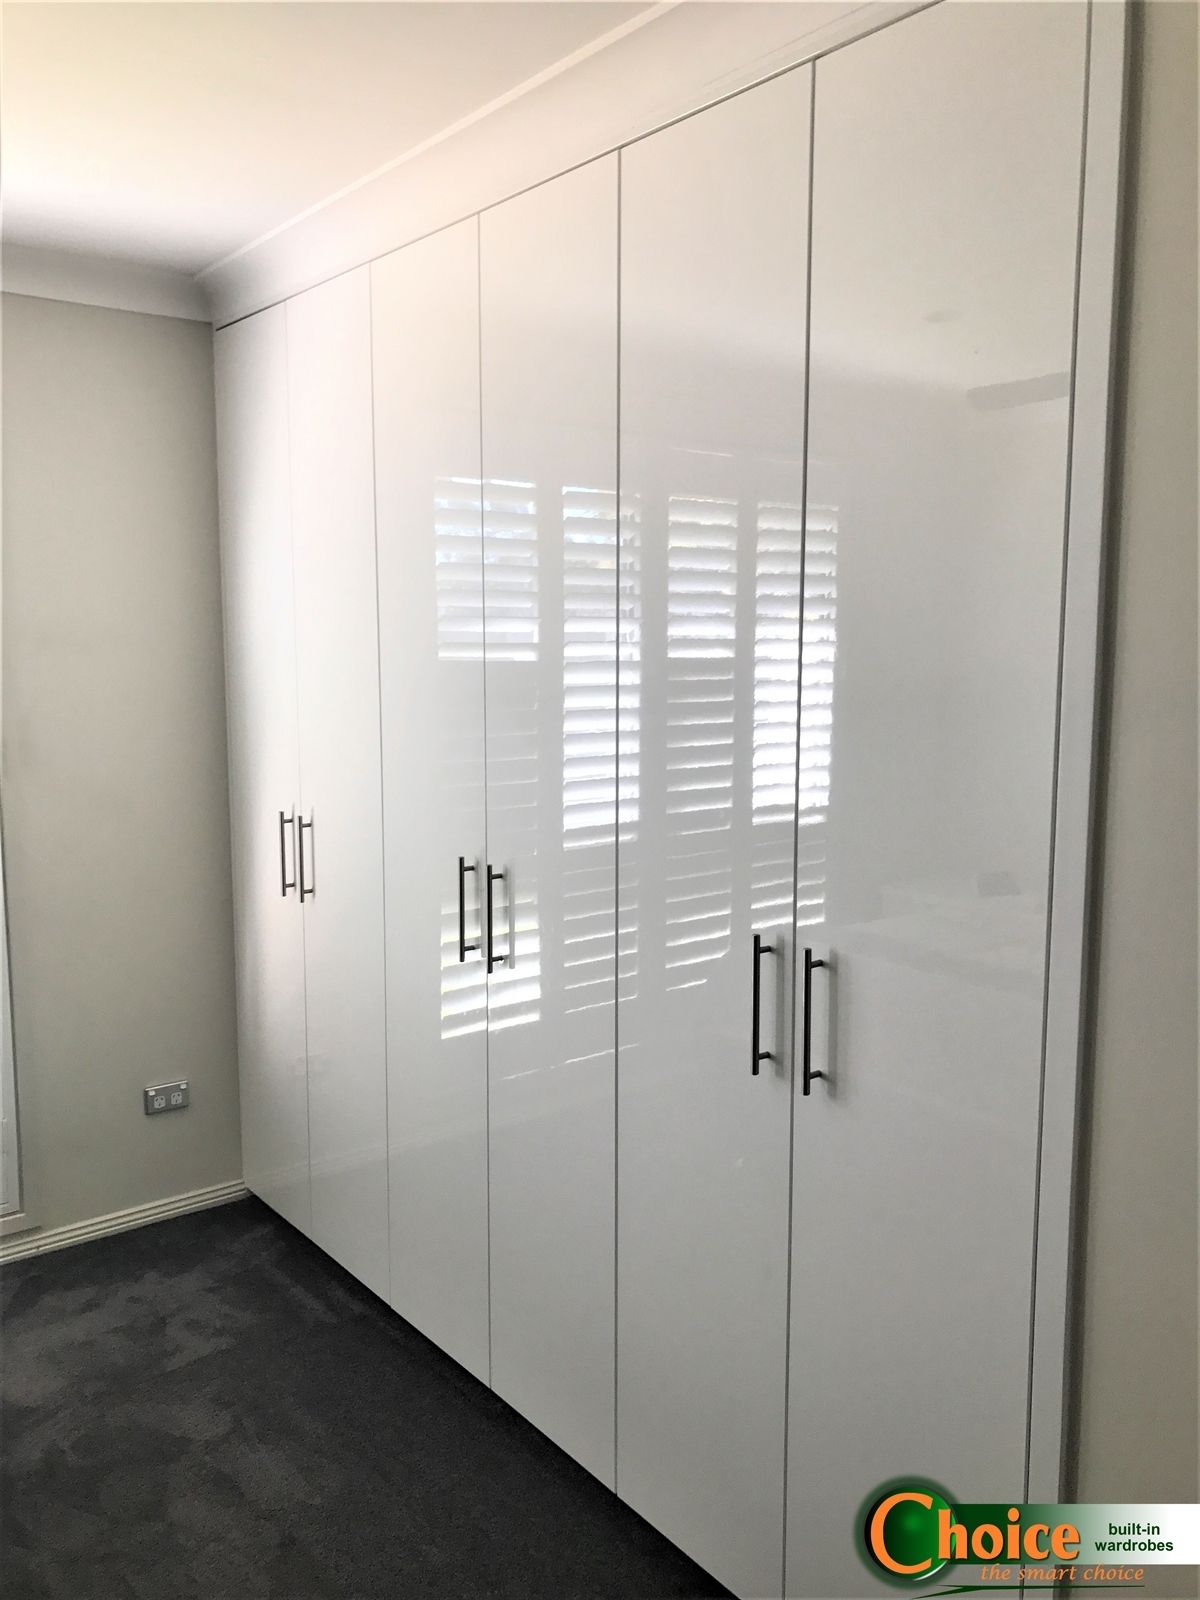 High Gloss White Pollurathane Sliding Doors  Choice Wardrobes | Built In  Wardrobes For Western Sydney  Choice Wardrobes For High Gloss Doors Wardrobes (View 7 of 15)